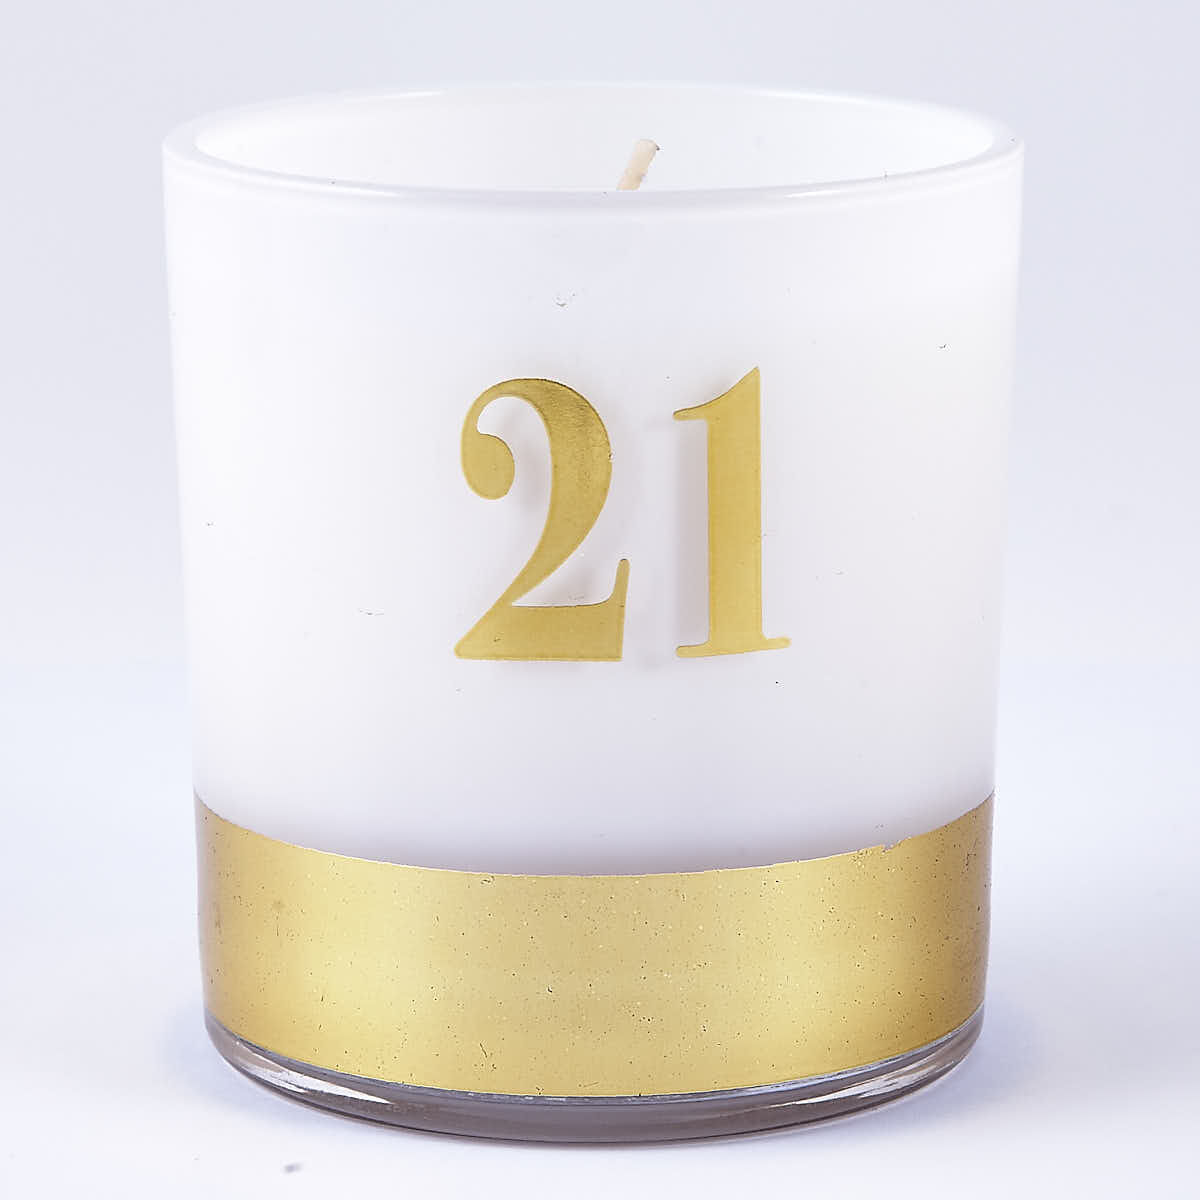 21st birthday candles Stock Photos and Images | agefotostock